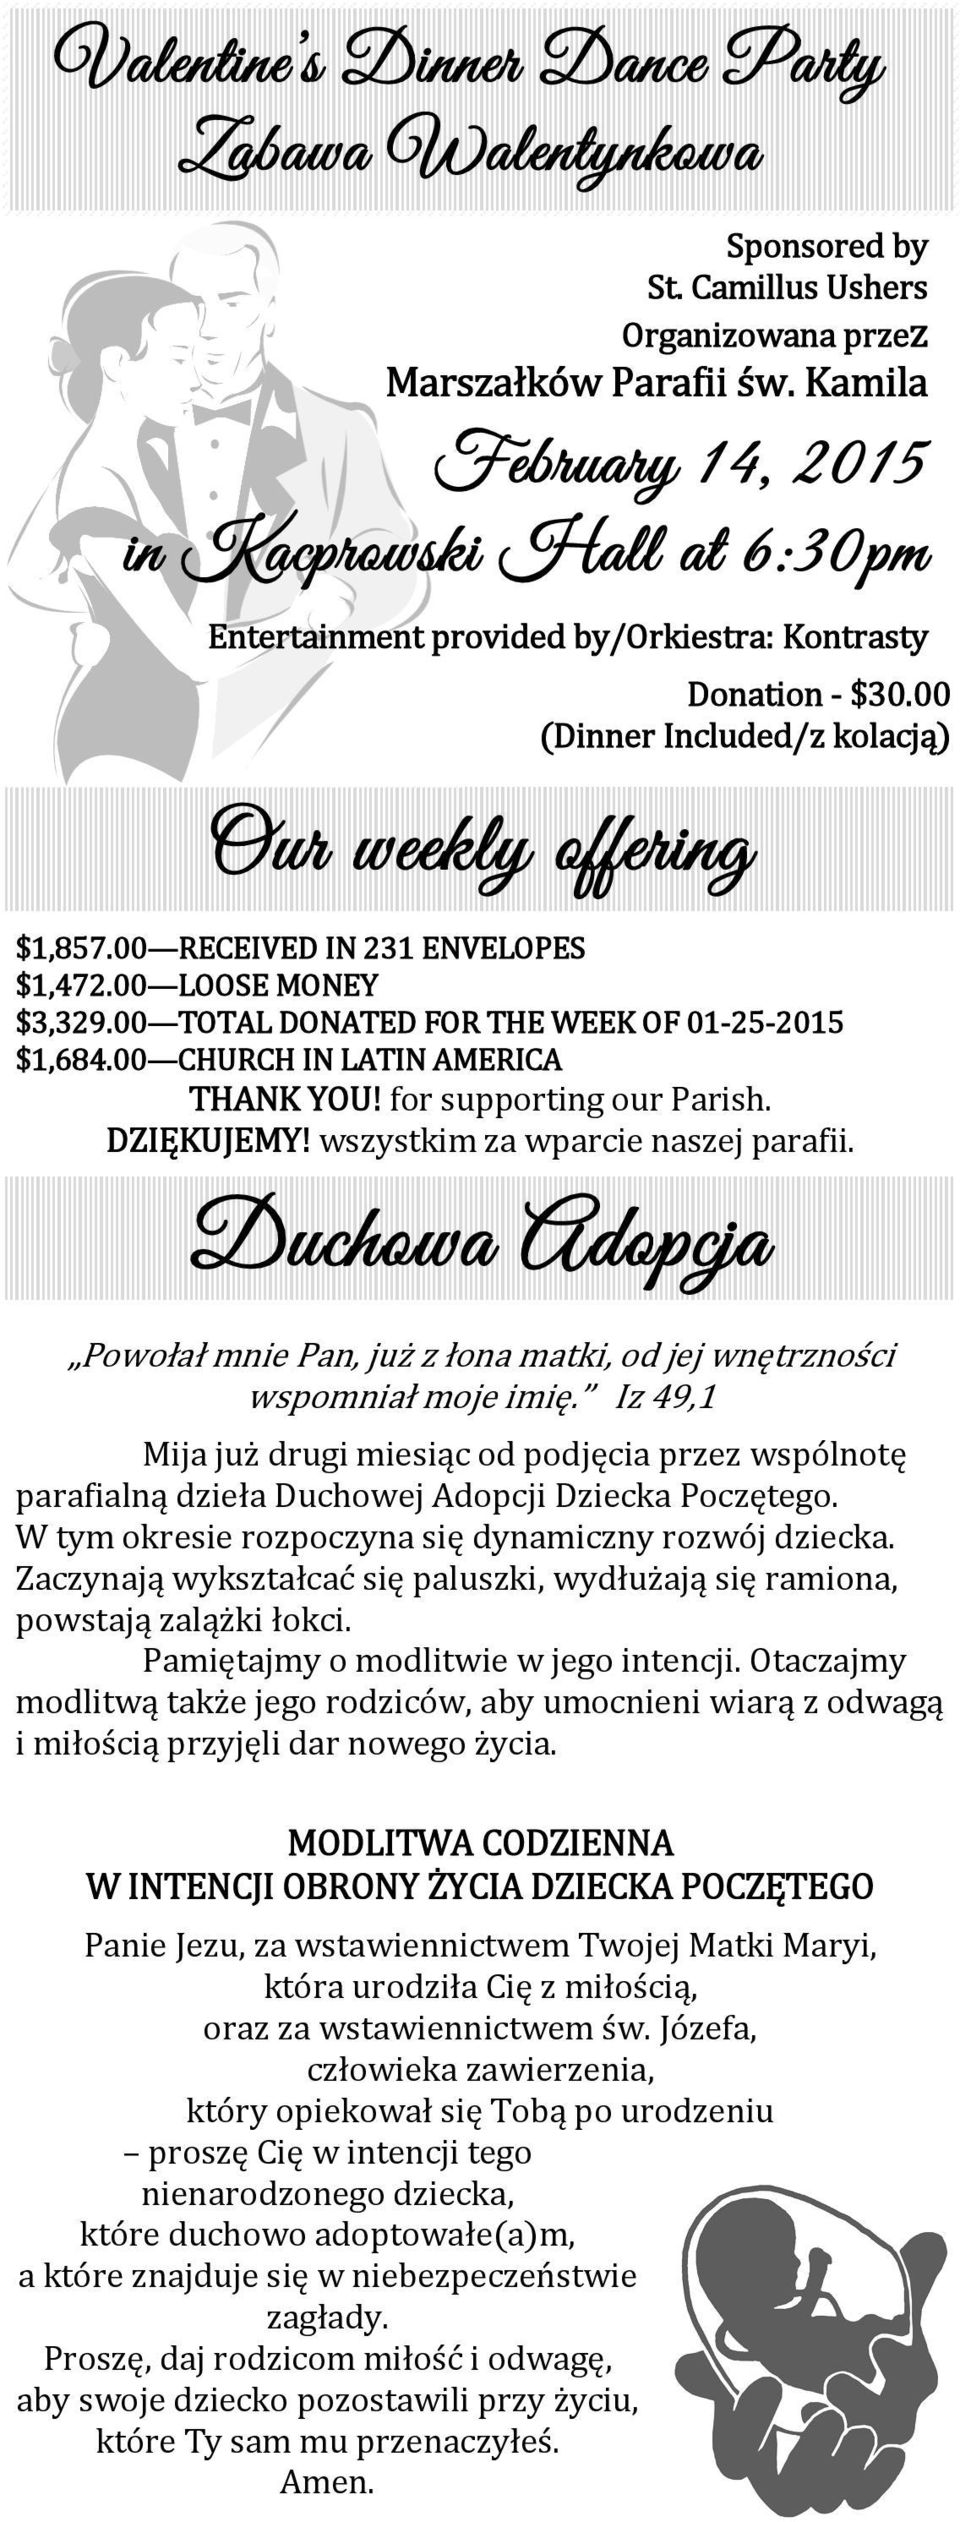 00 RECEIVED IN 231 ENVELOPES $1,472.00 LOOSE MONEY $3,329.00 TOTAL DONATED FOR THE WEEK OF 01-25-2015 $1,684.00 CHURCH IN LATIN AMERICA THANK YOU! for supporting our Parish. DZIĘKUJEMY!